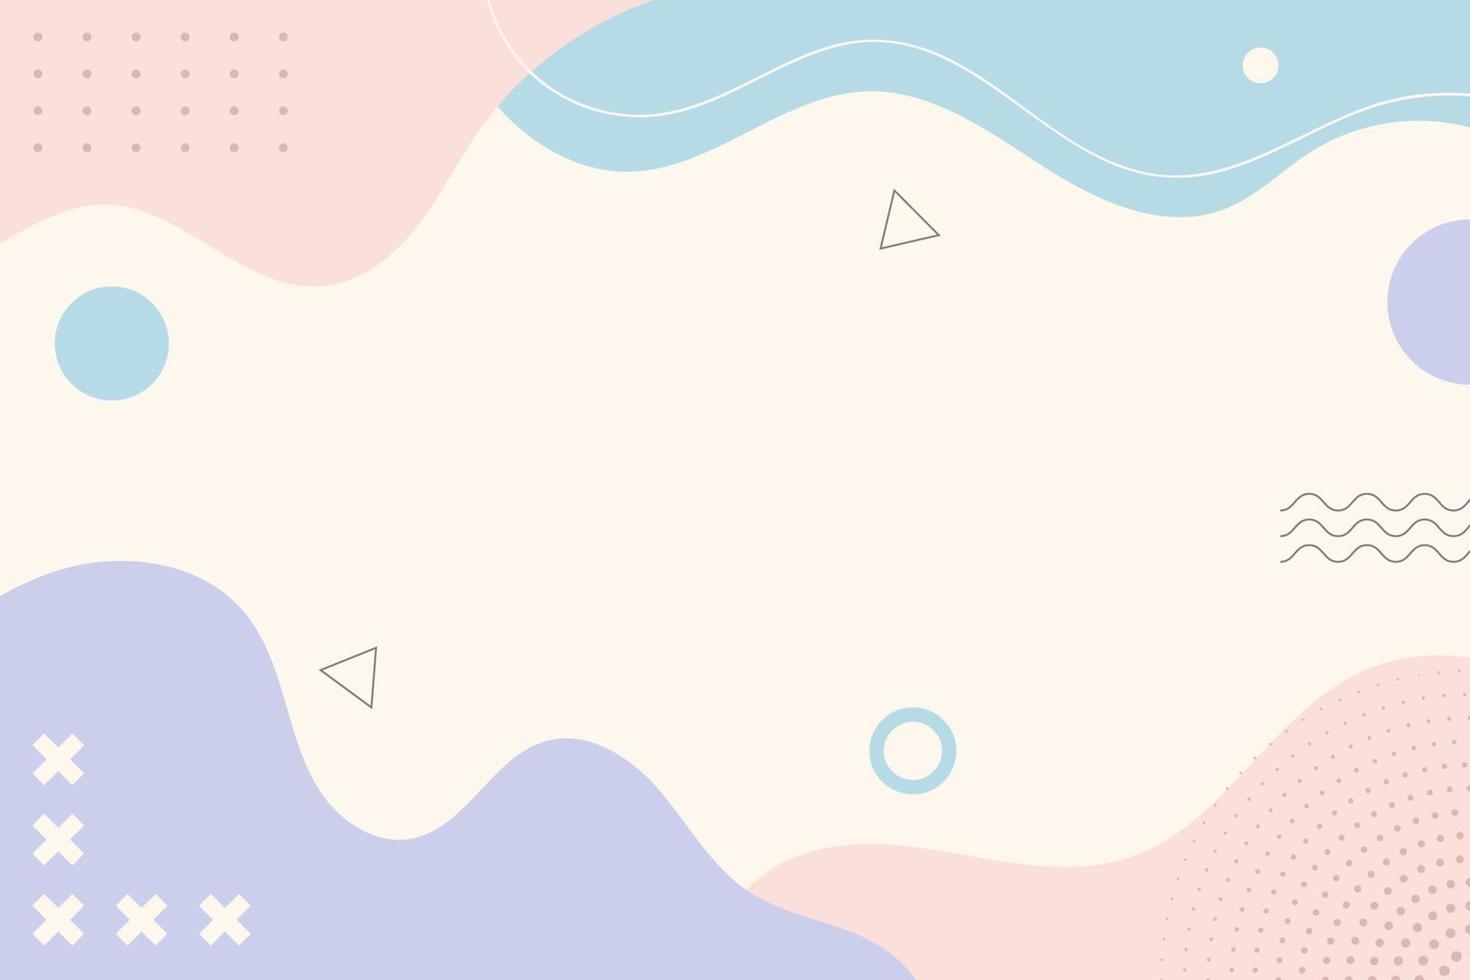 Abstract background. Hand drawing various shapes and memphis element. Trendy modern contemporary vector illustration. Every background is isolated. Pastel color